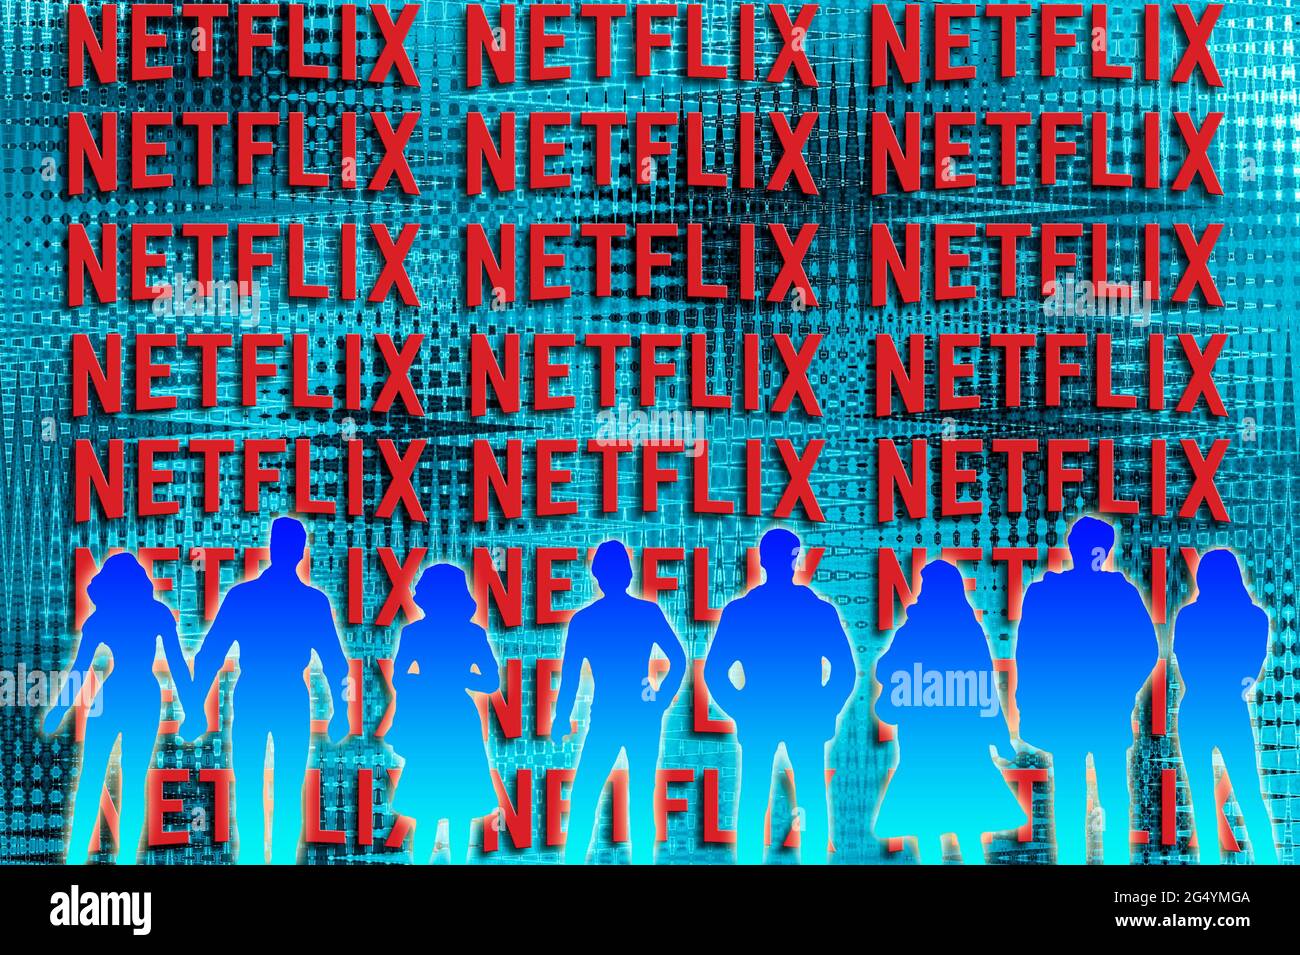 silhouettes of people in front of a  wall with Netflix logo pattern Stock Photo